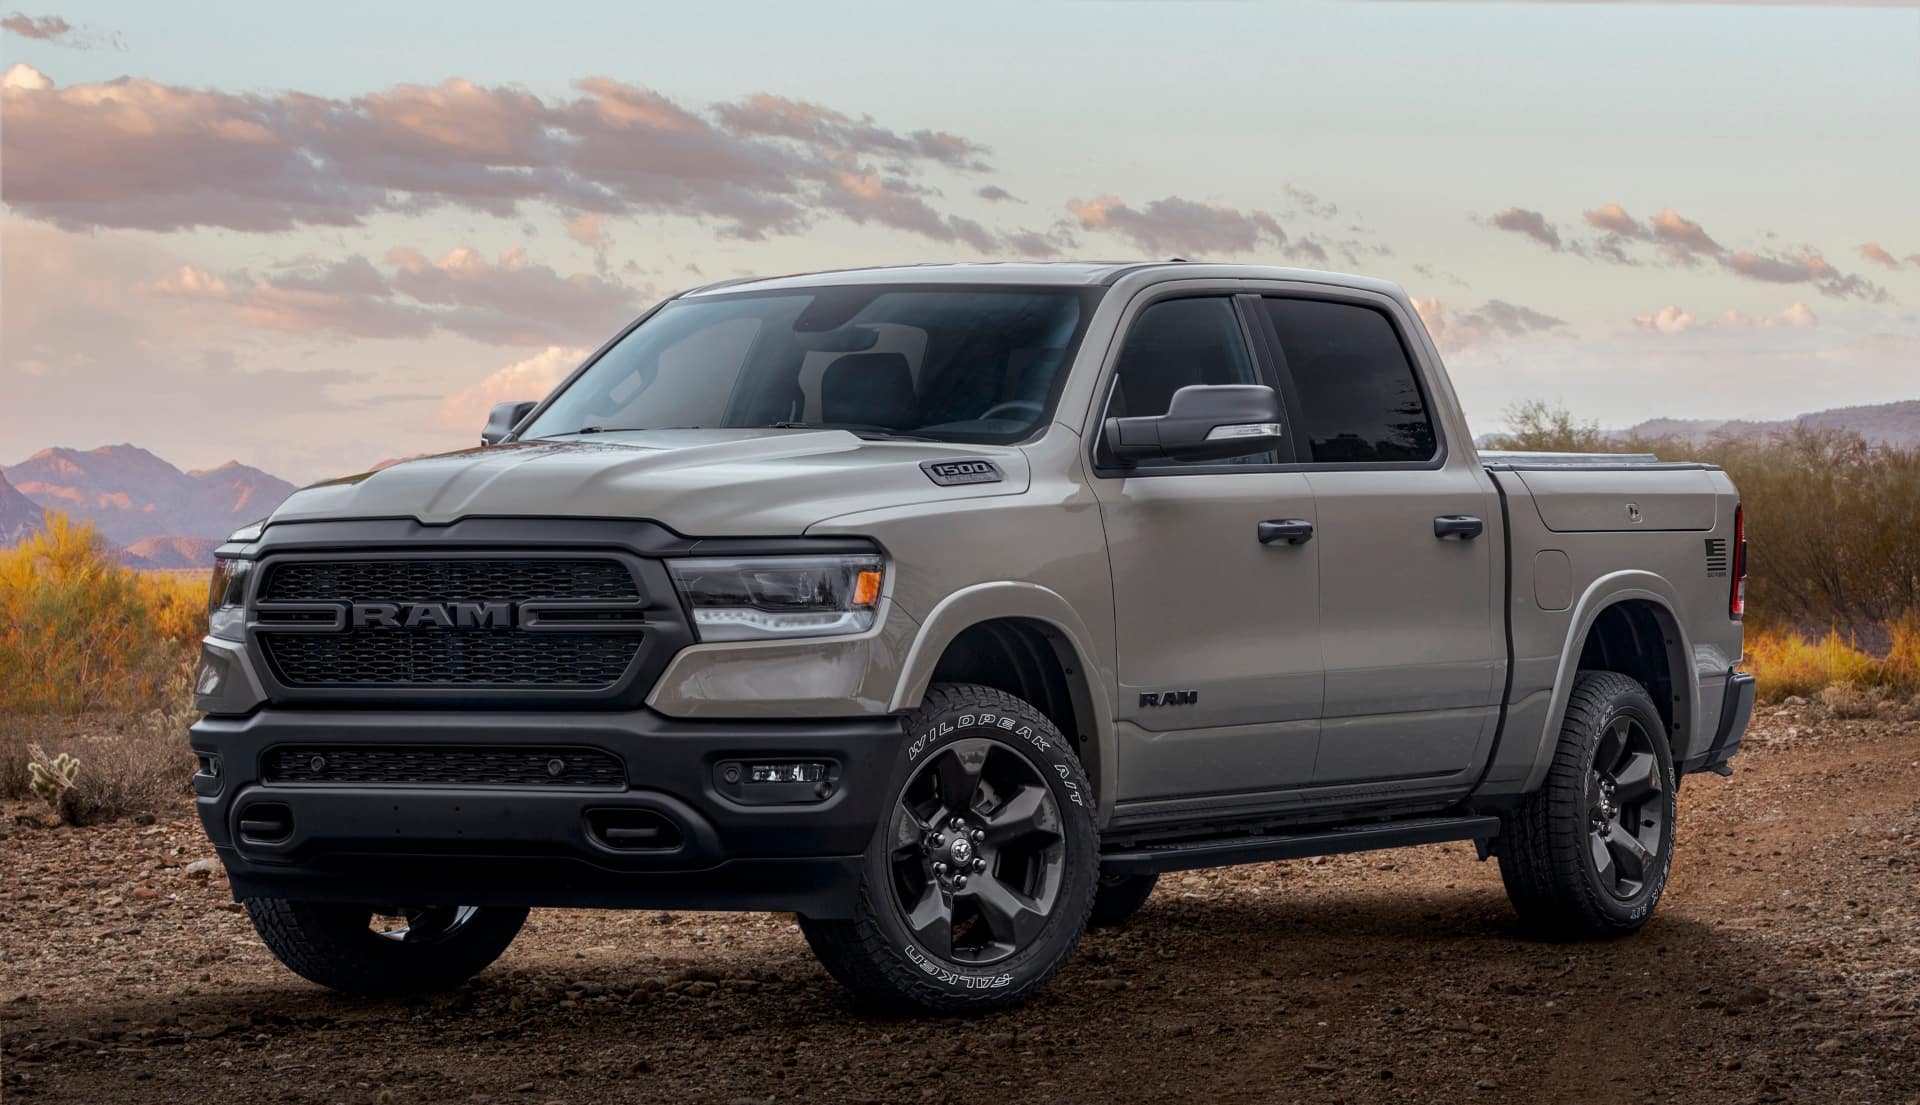 Top 10 trucks for towing 9 - Best Trucks by Towing Capacity – Every Model Ranked &amp; Rated by Our Experts